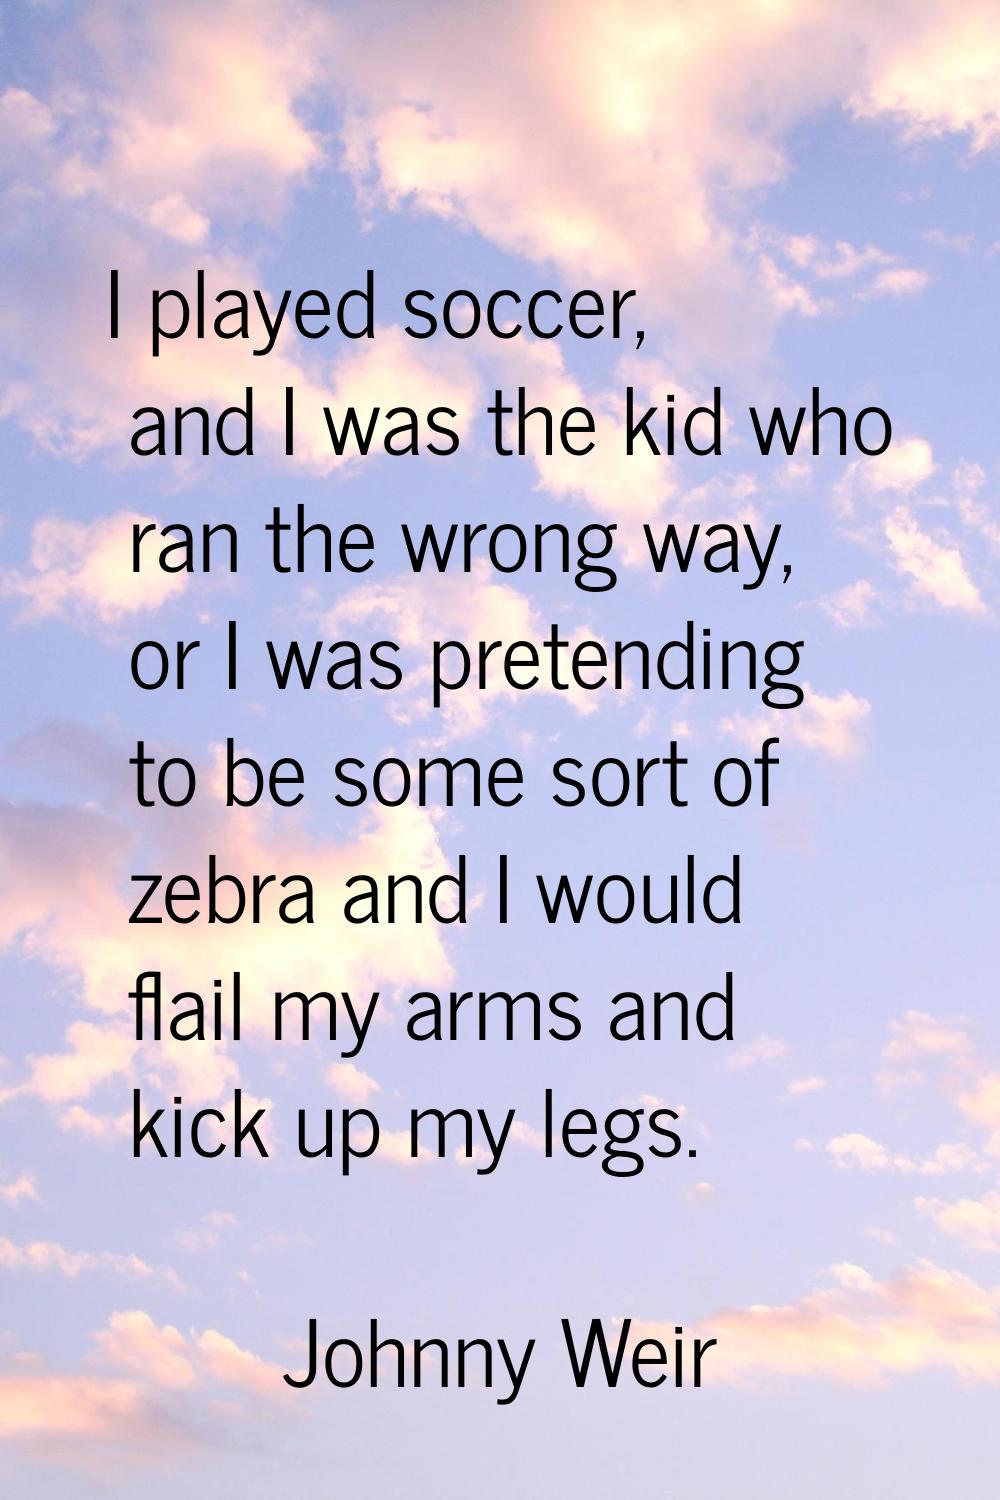 I played soccer, and I was the kid who ran the wrong way, or I was pretending to be some sort of ze